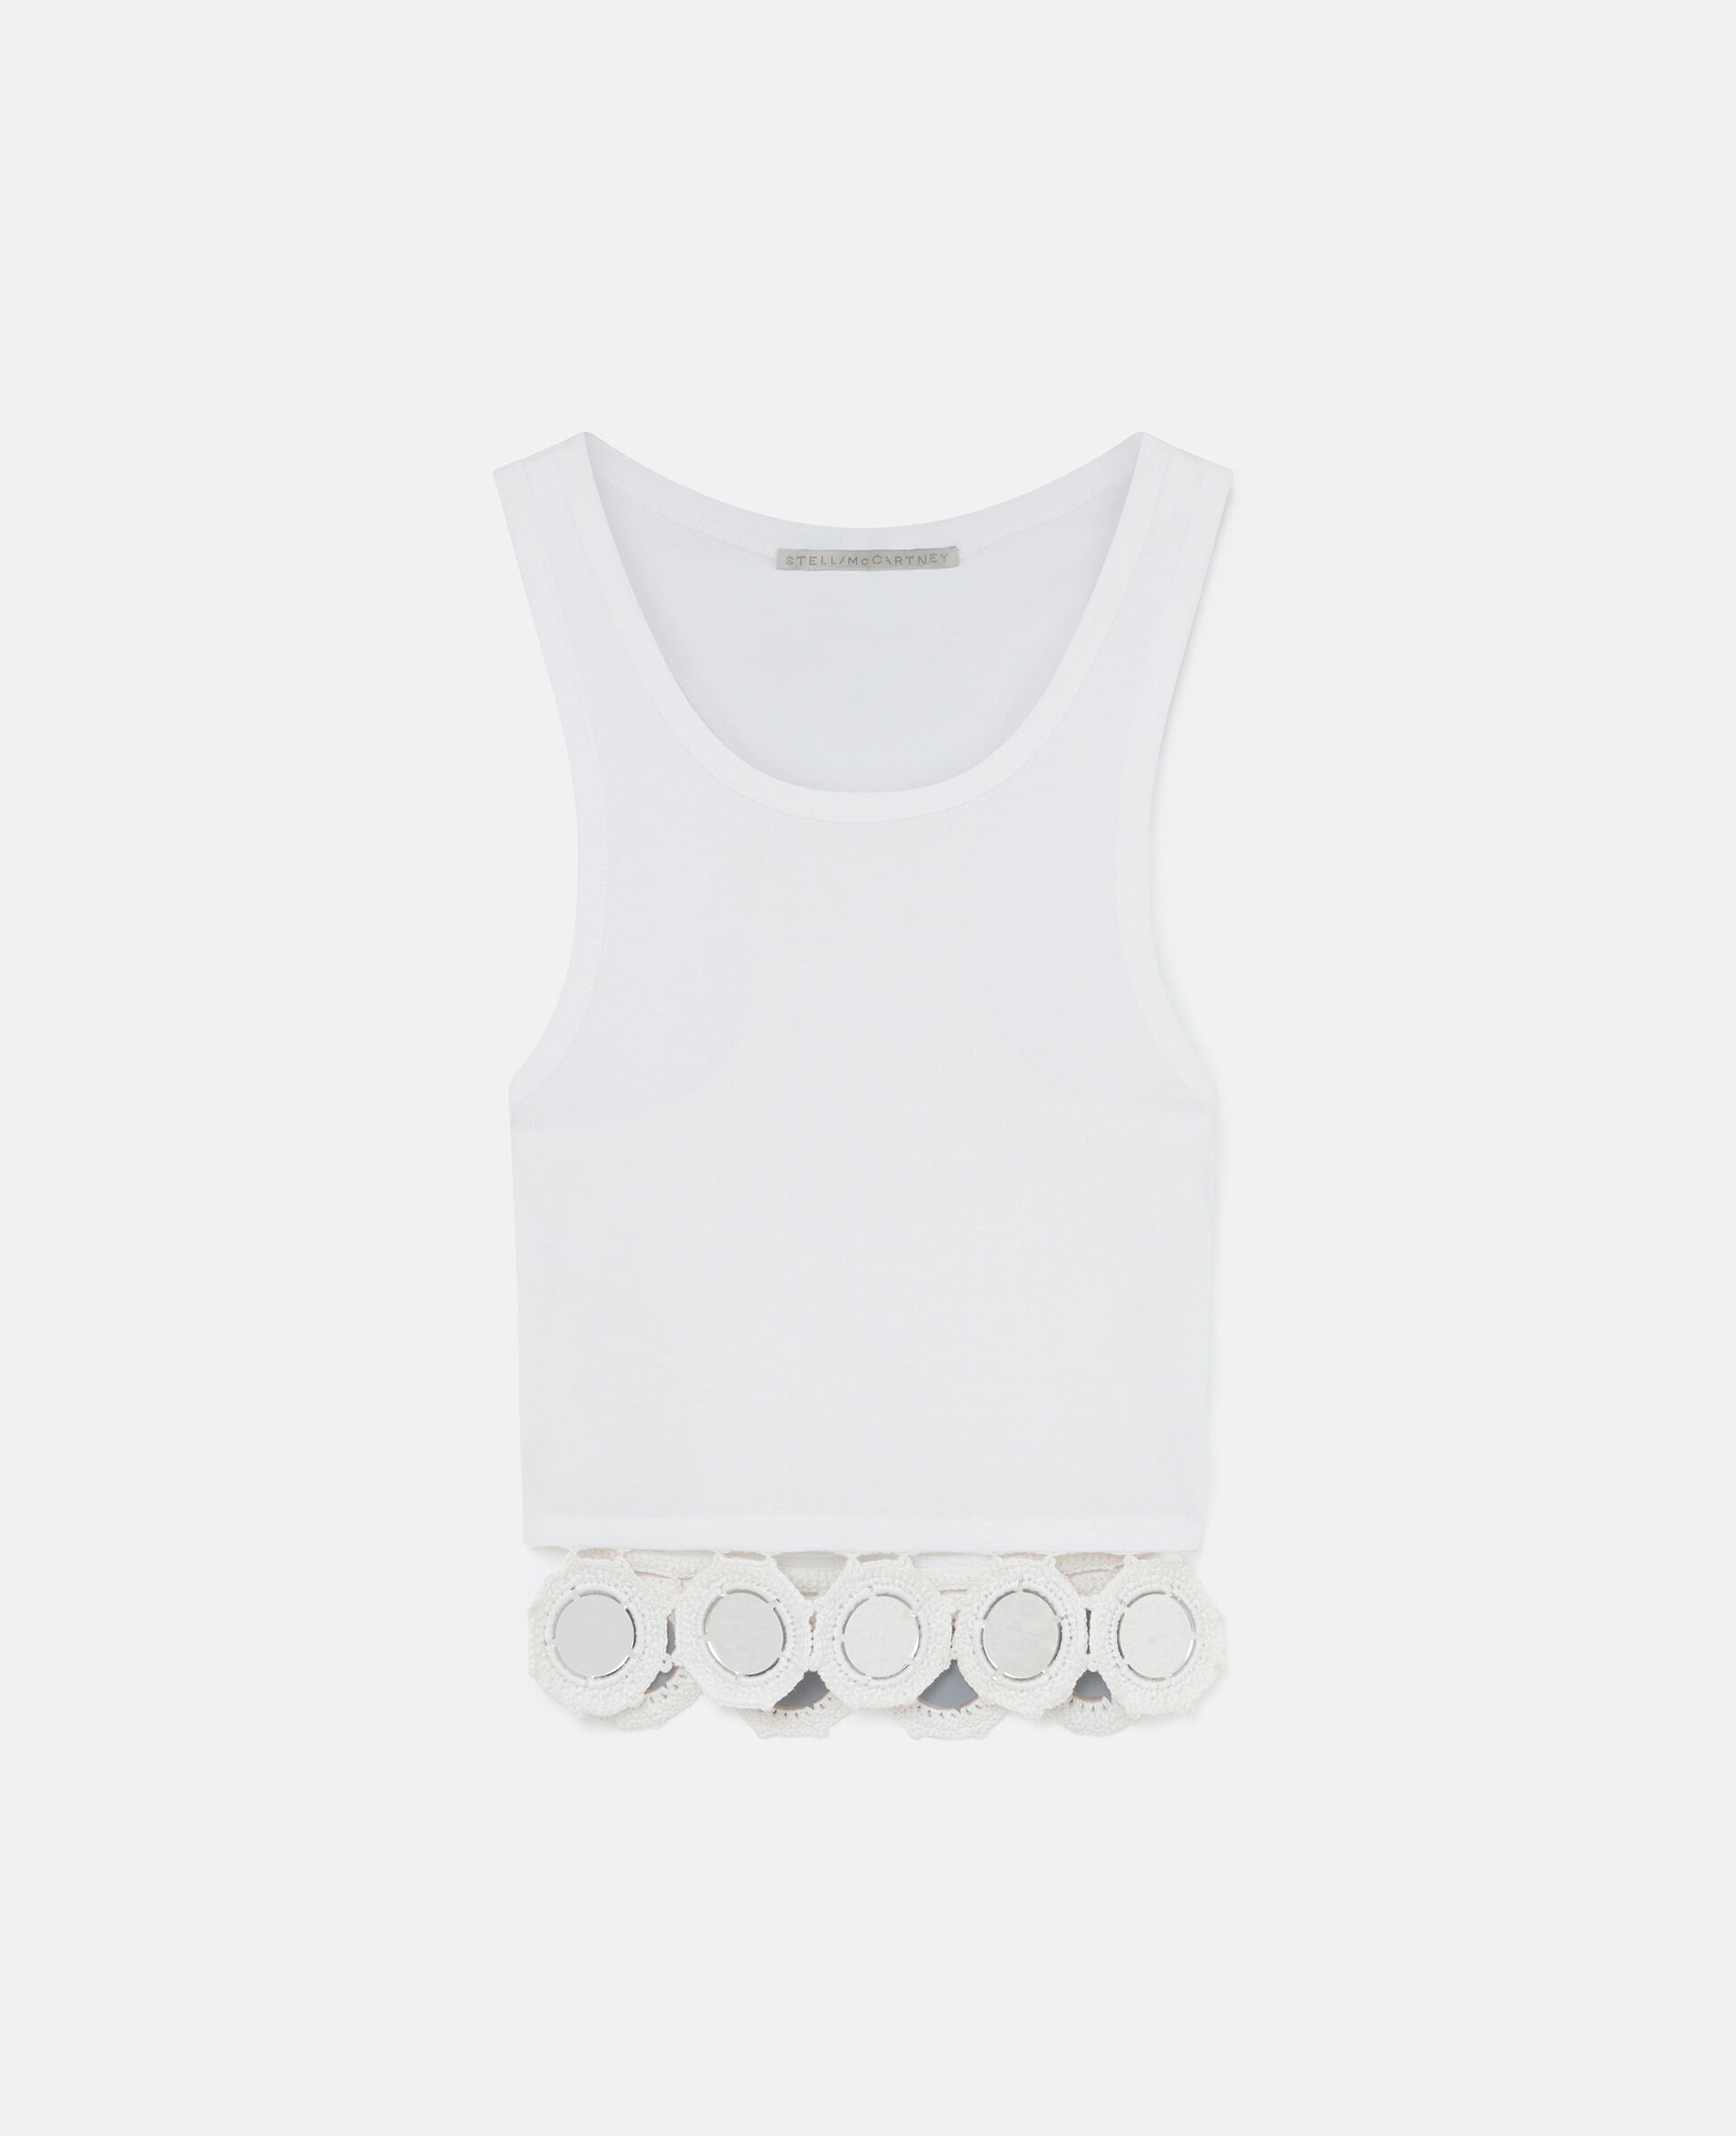 Mirror Crochet Tank Top-White-large image number 0